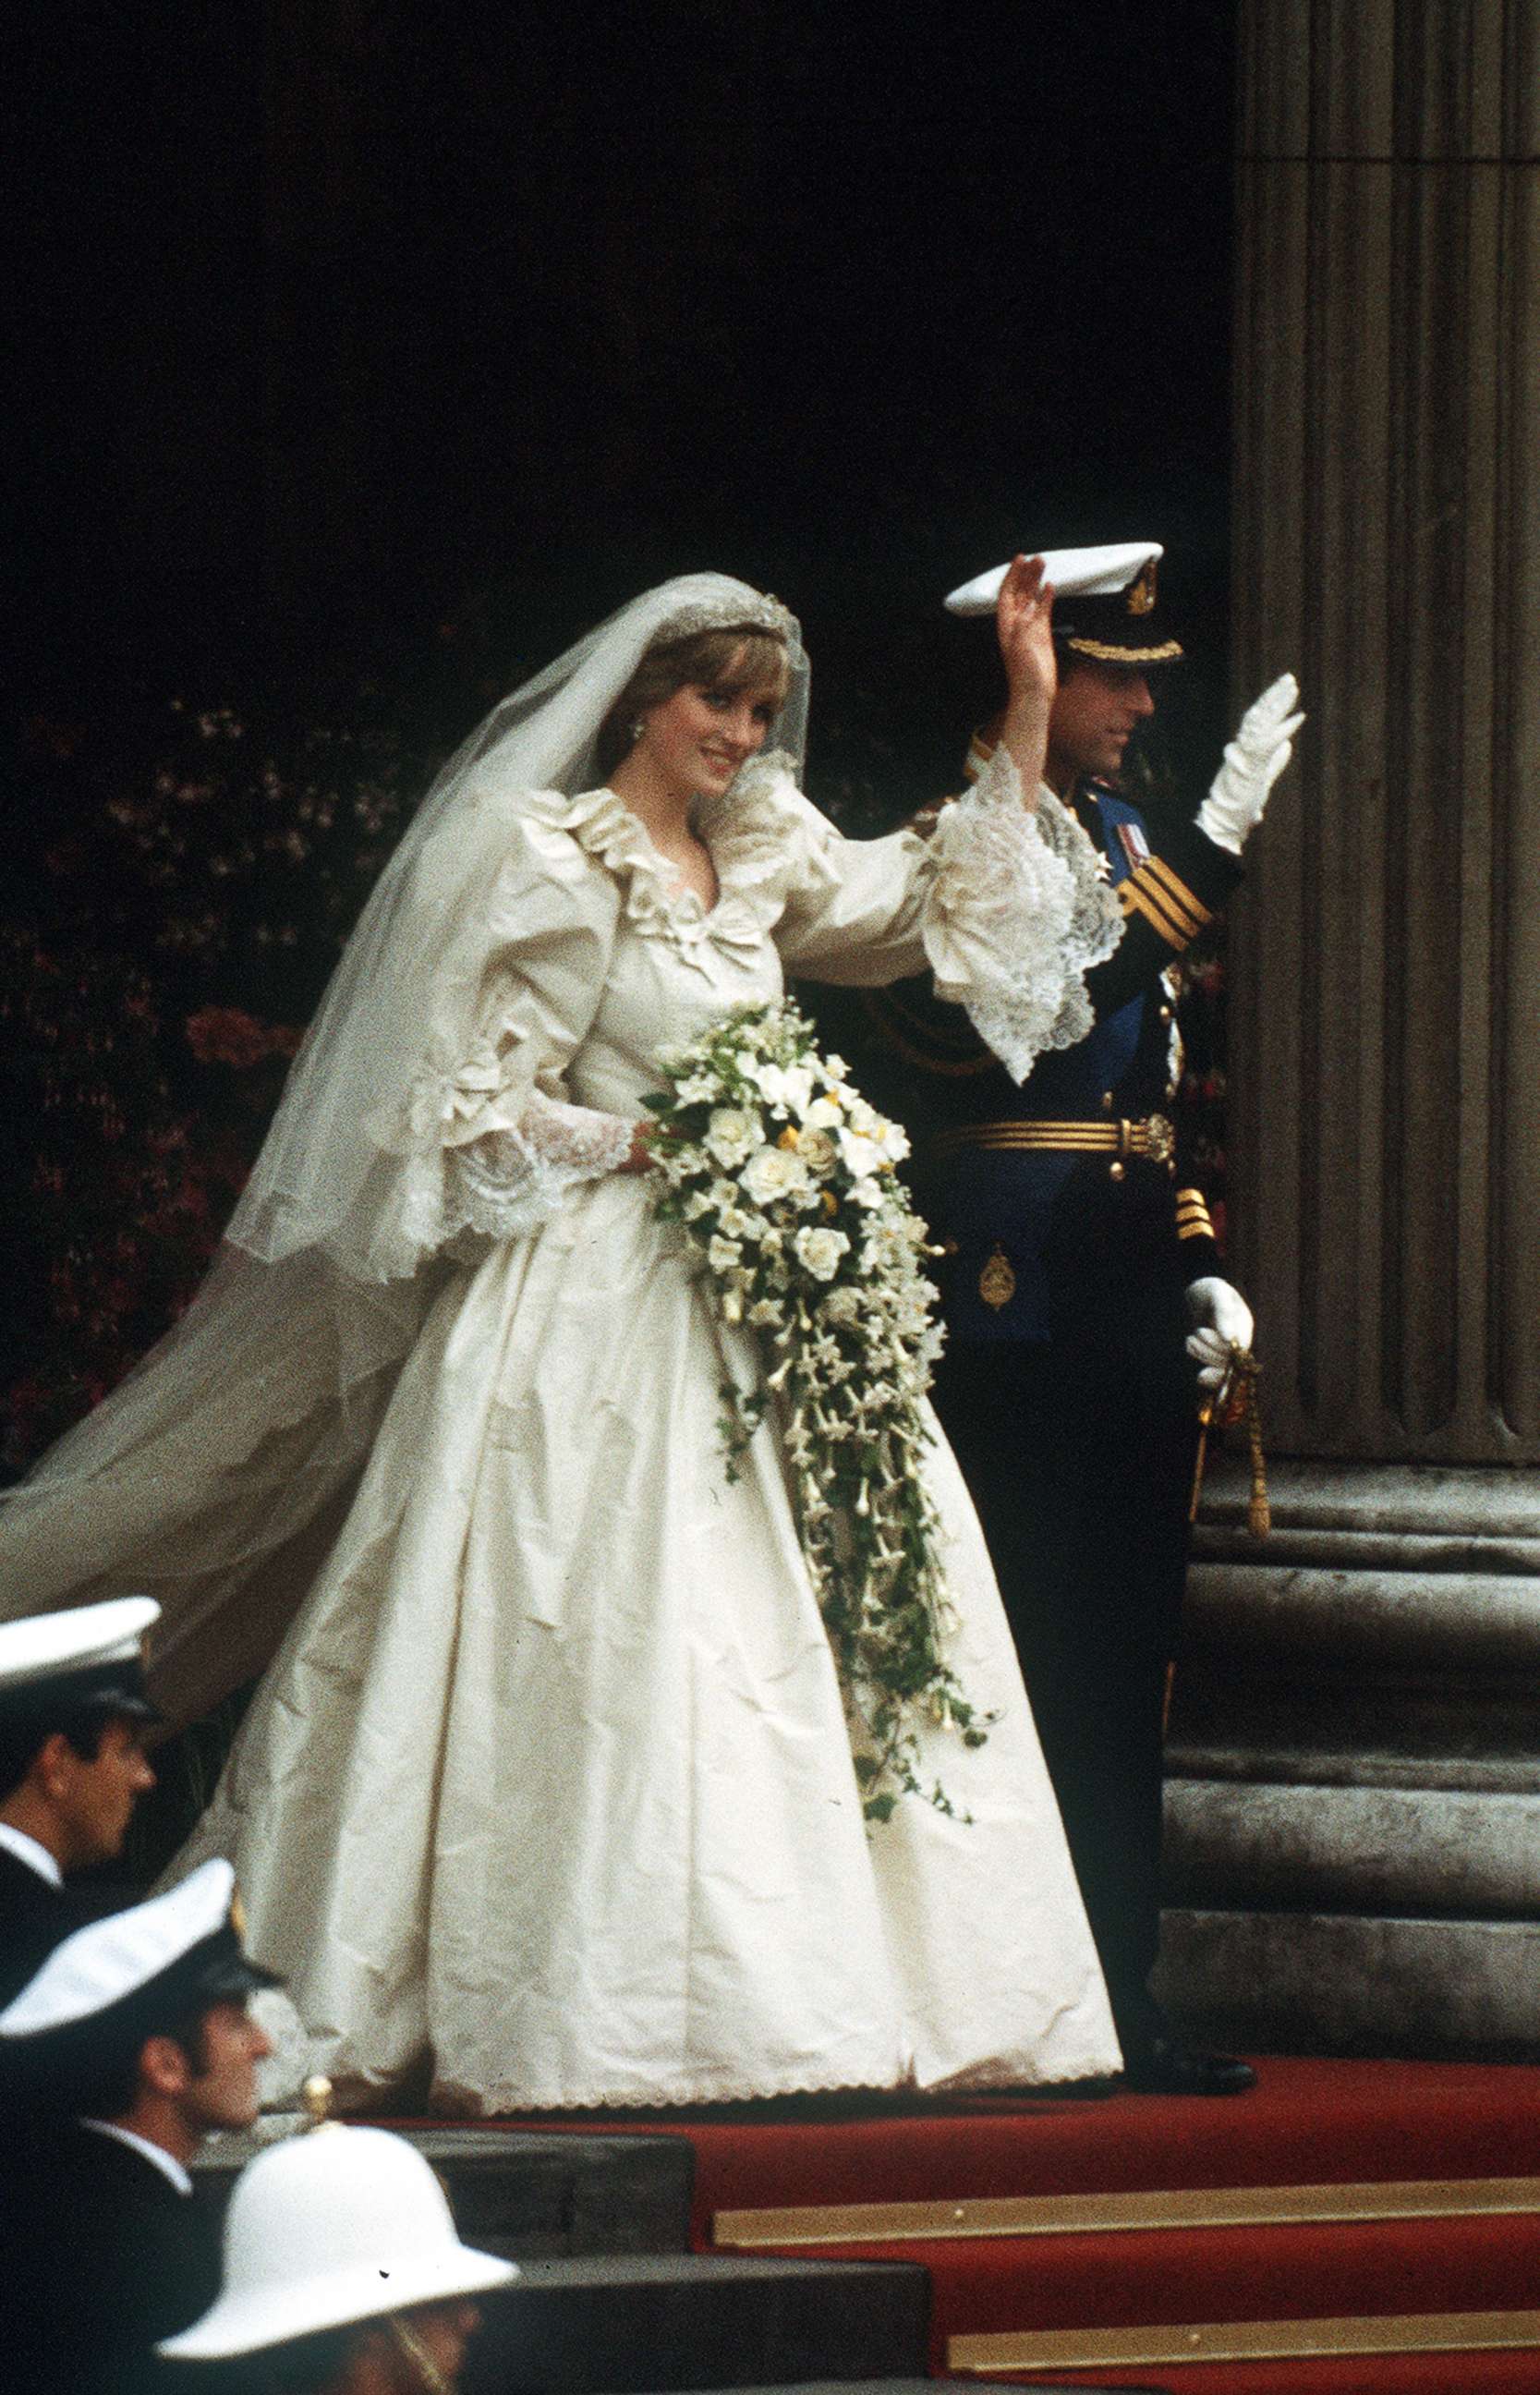 PHOTO: The Prince and Princess of Wales leave St Paul's Cathedral after their wedding, July 29, 1981.